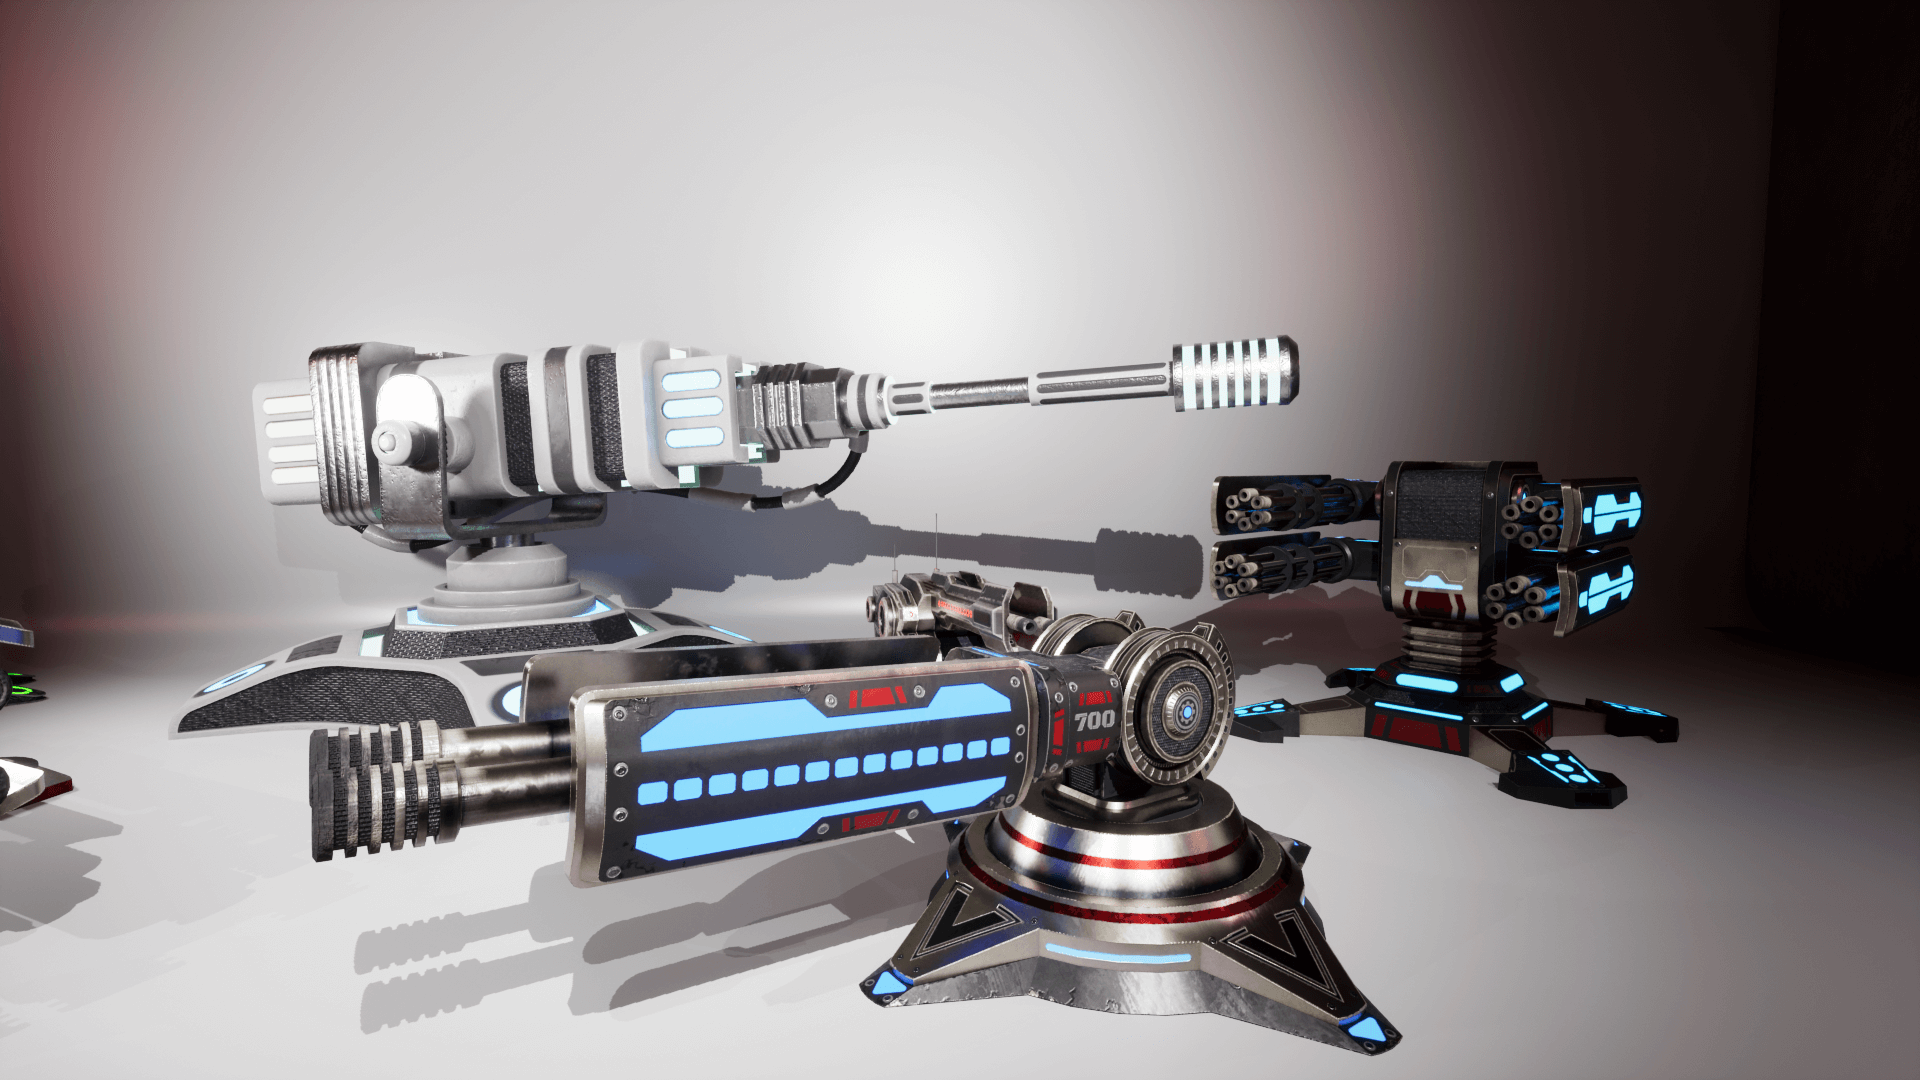 An image showing the SciFi Turrets asset pack, created with Unreal Engine